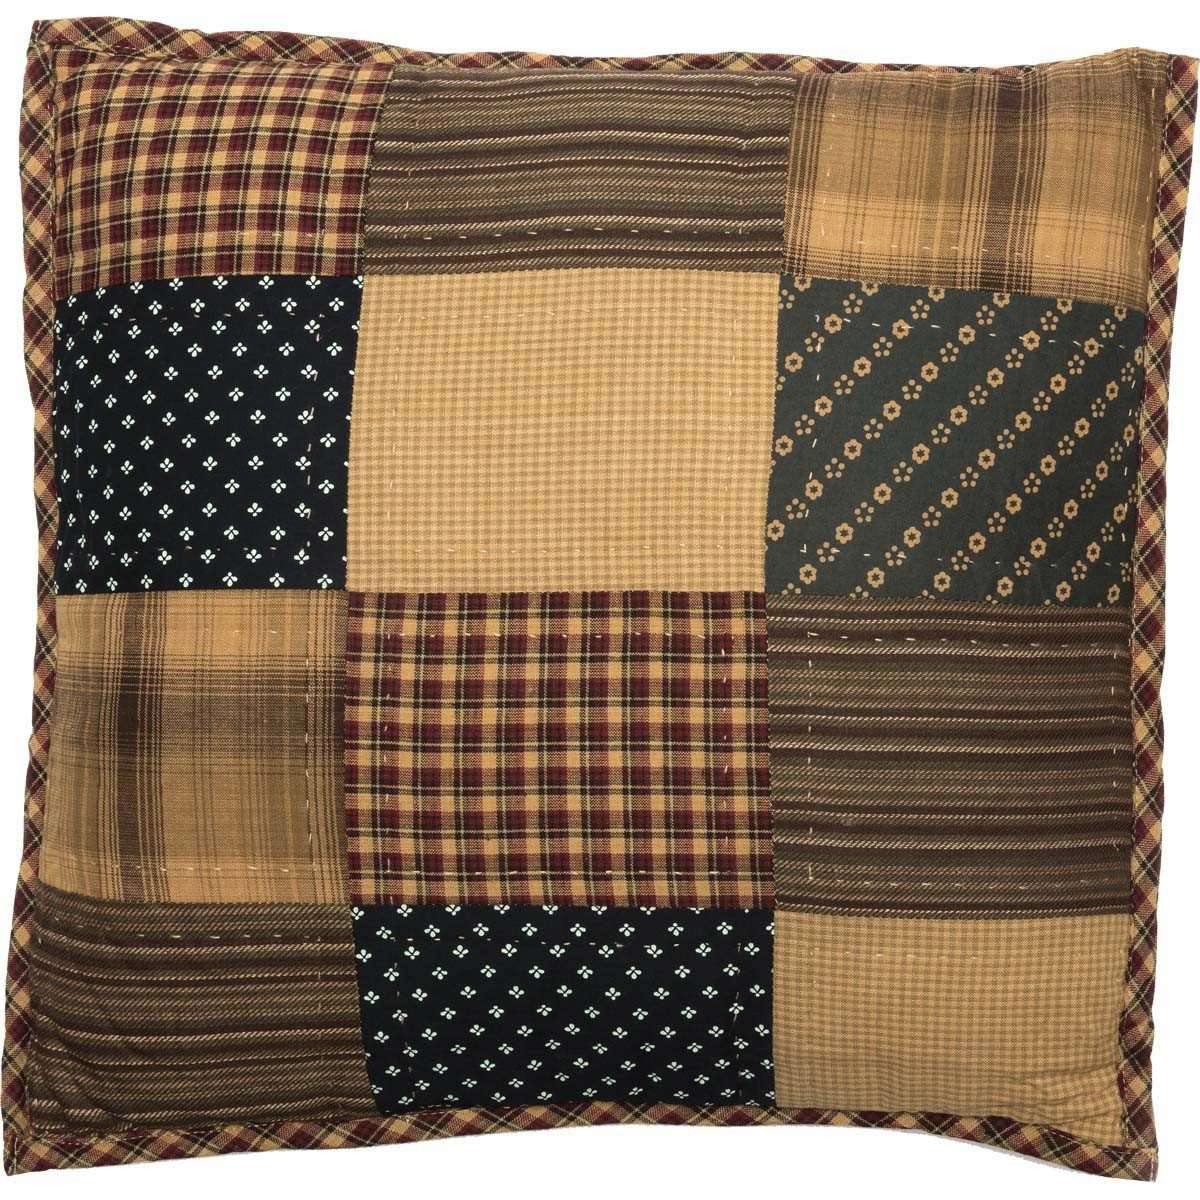 Patriotic Patch Quilted Pillow 16x16 VHC Brands front